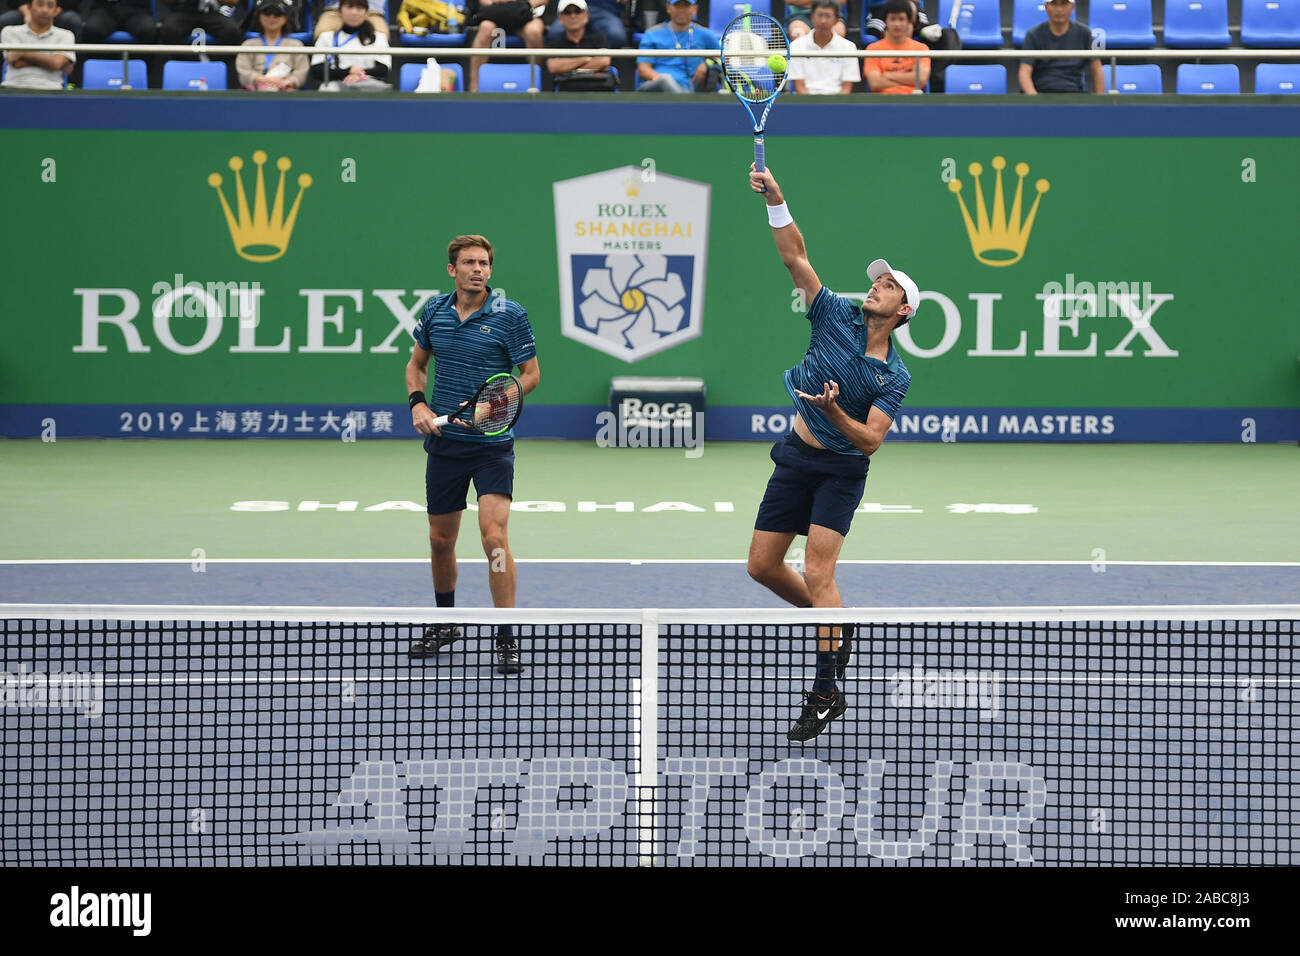 Nicolas Mahut of France and Edouard Roger-Vasselin of France compete against Rajeev Ram of the USA and Joe Salisbury of Brazil during the quarterfinal Stock Photo